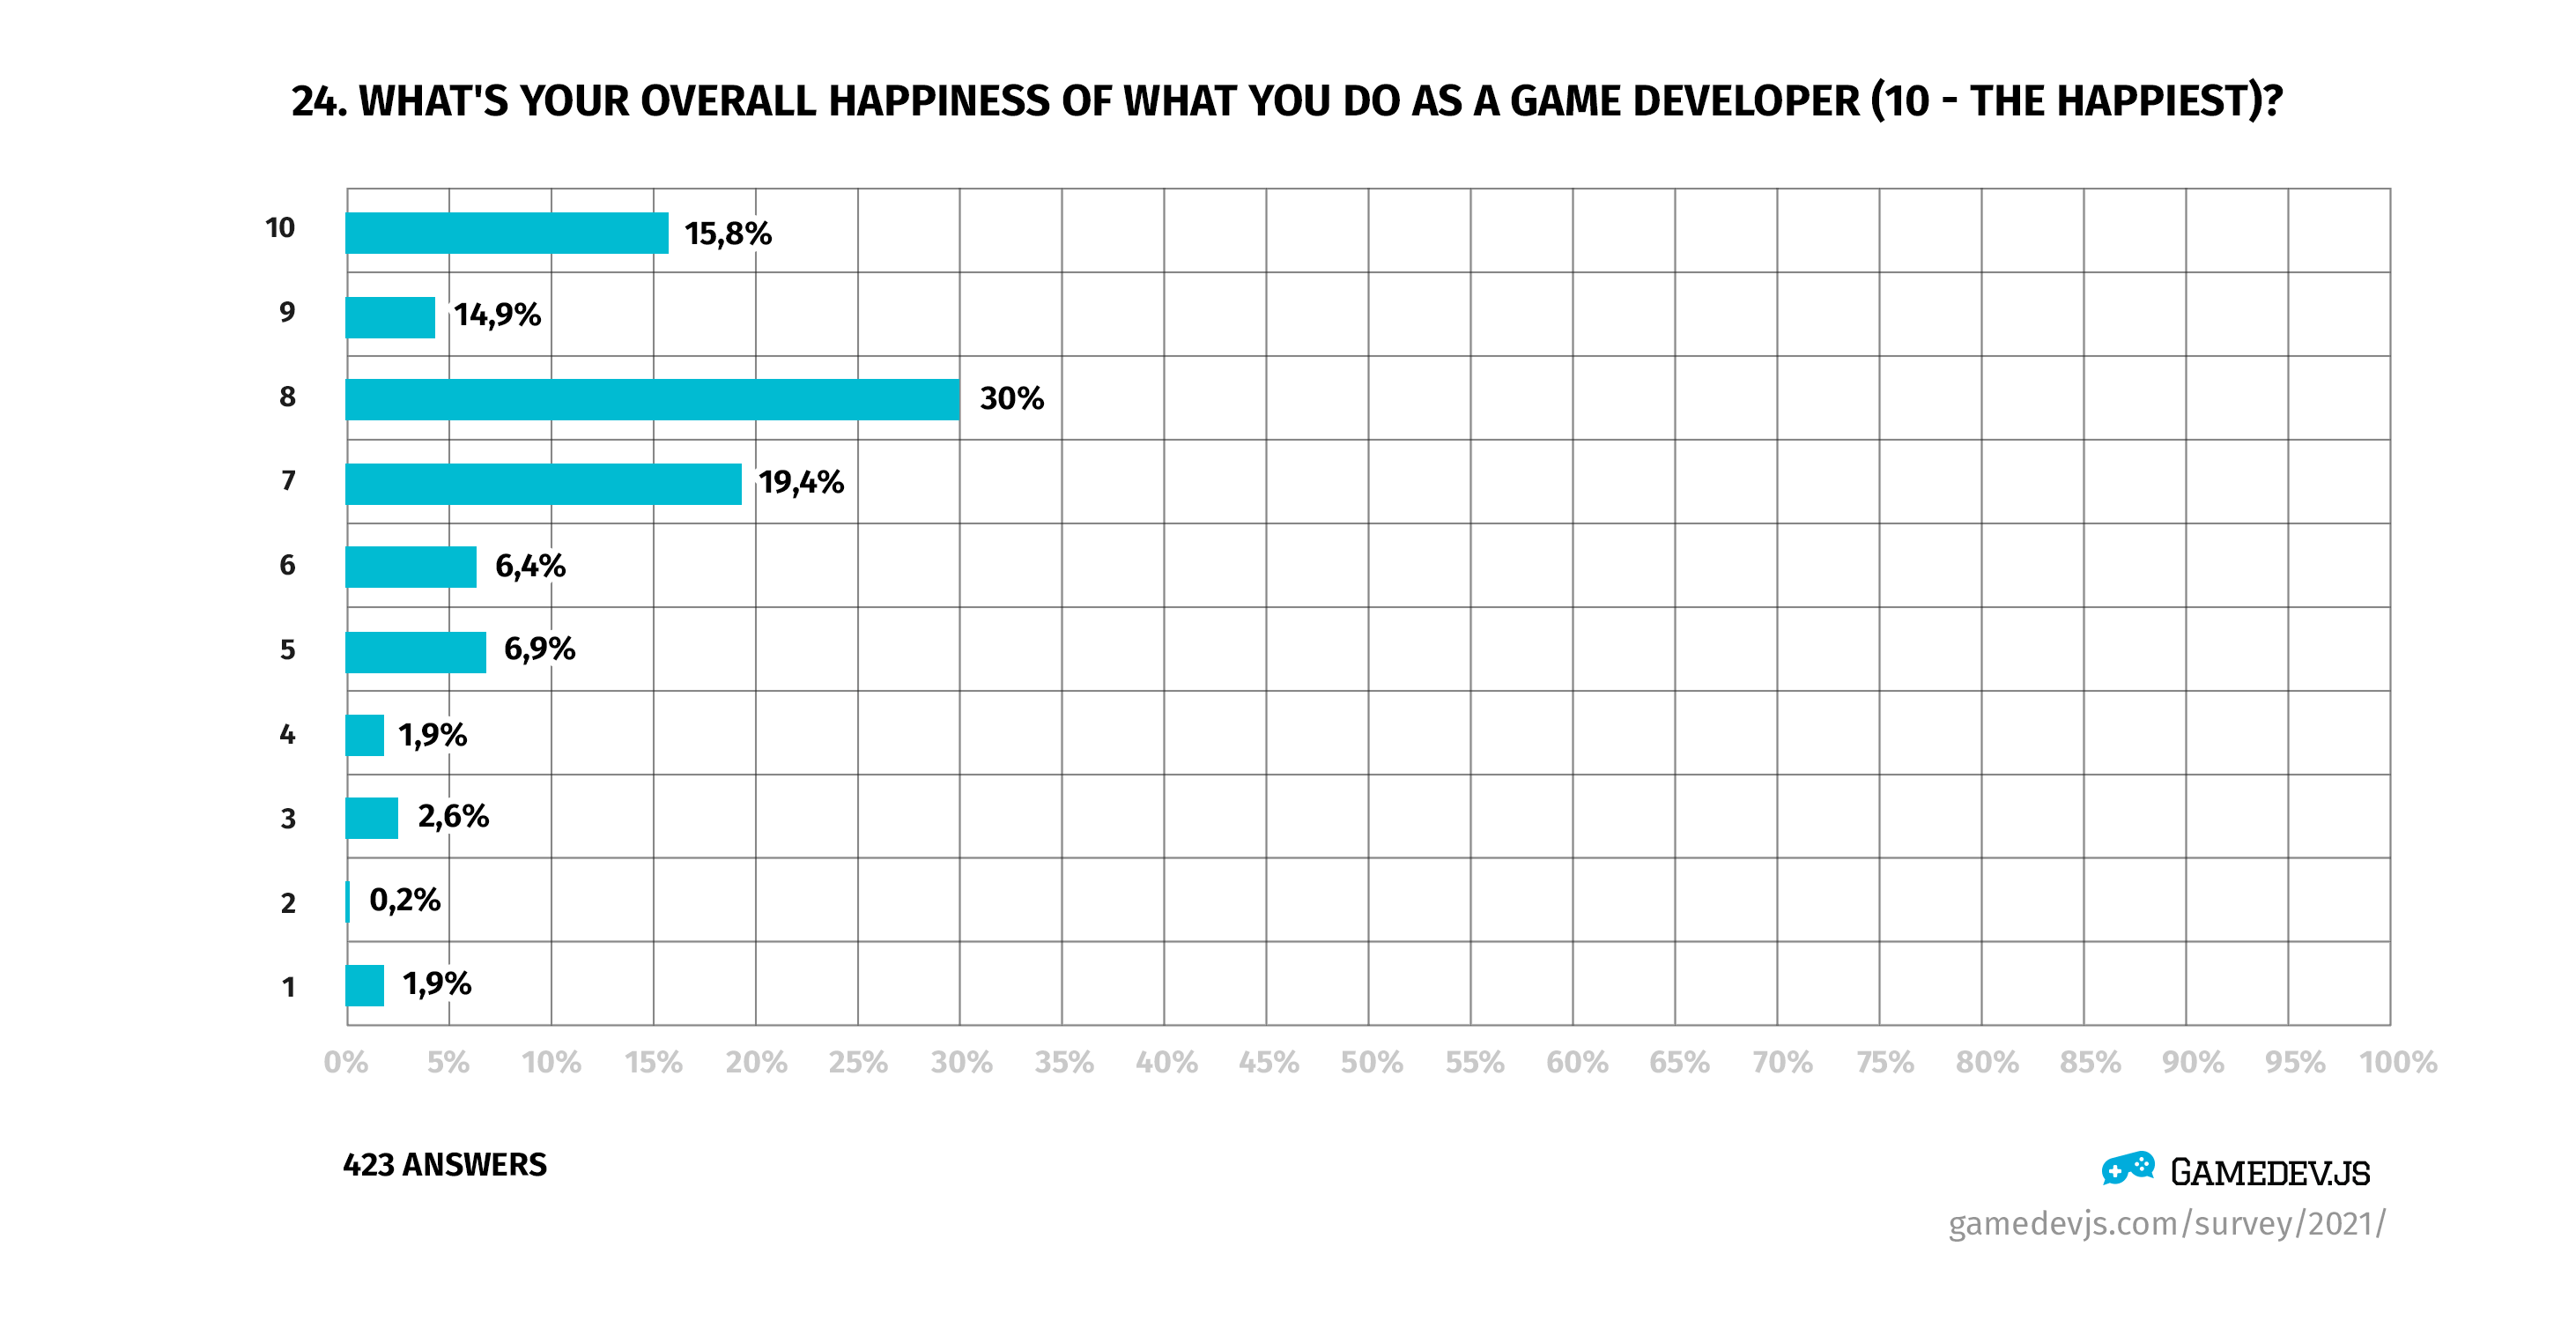 Gamedev.js Survey 2021 - Question #24: What's your overall happiness of what you do as a game developer (10 - the happiest)?